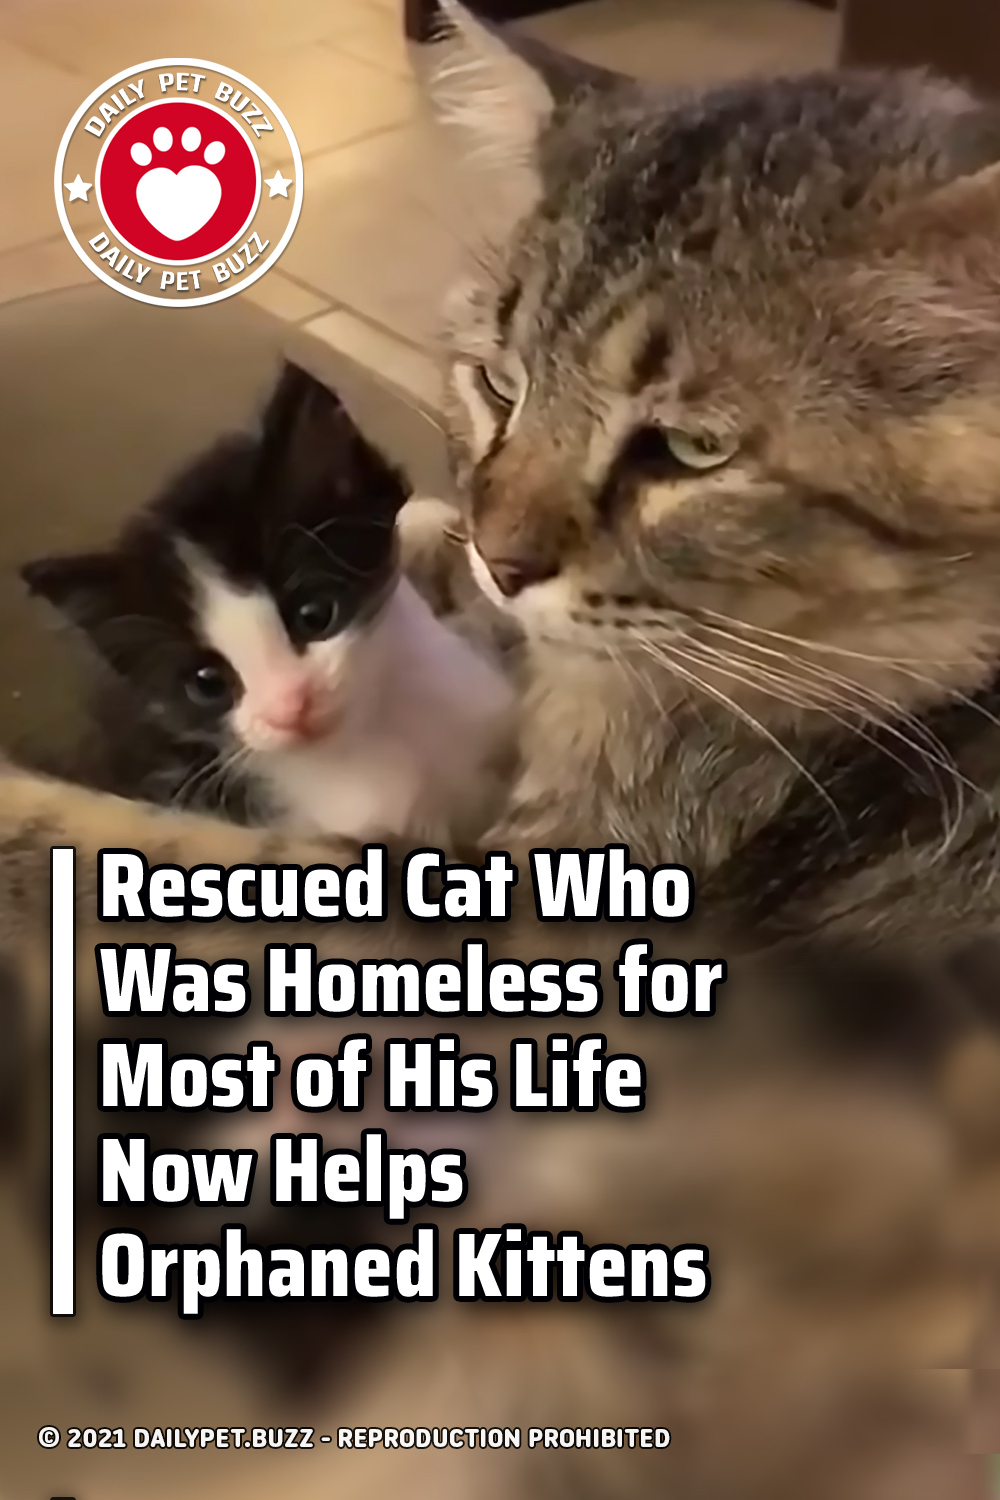 Rescued Cat Who Was Homeless for Most of His Life Now Helps Orphaned Kittens